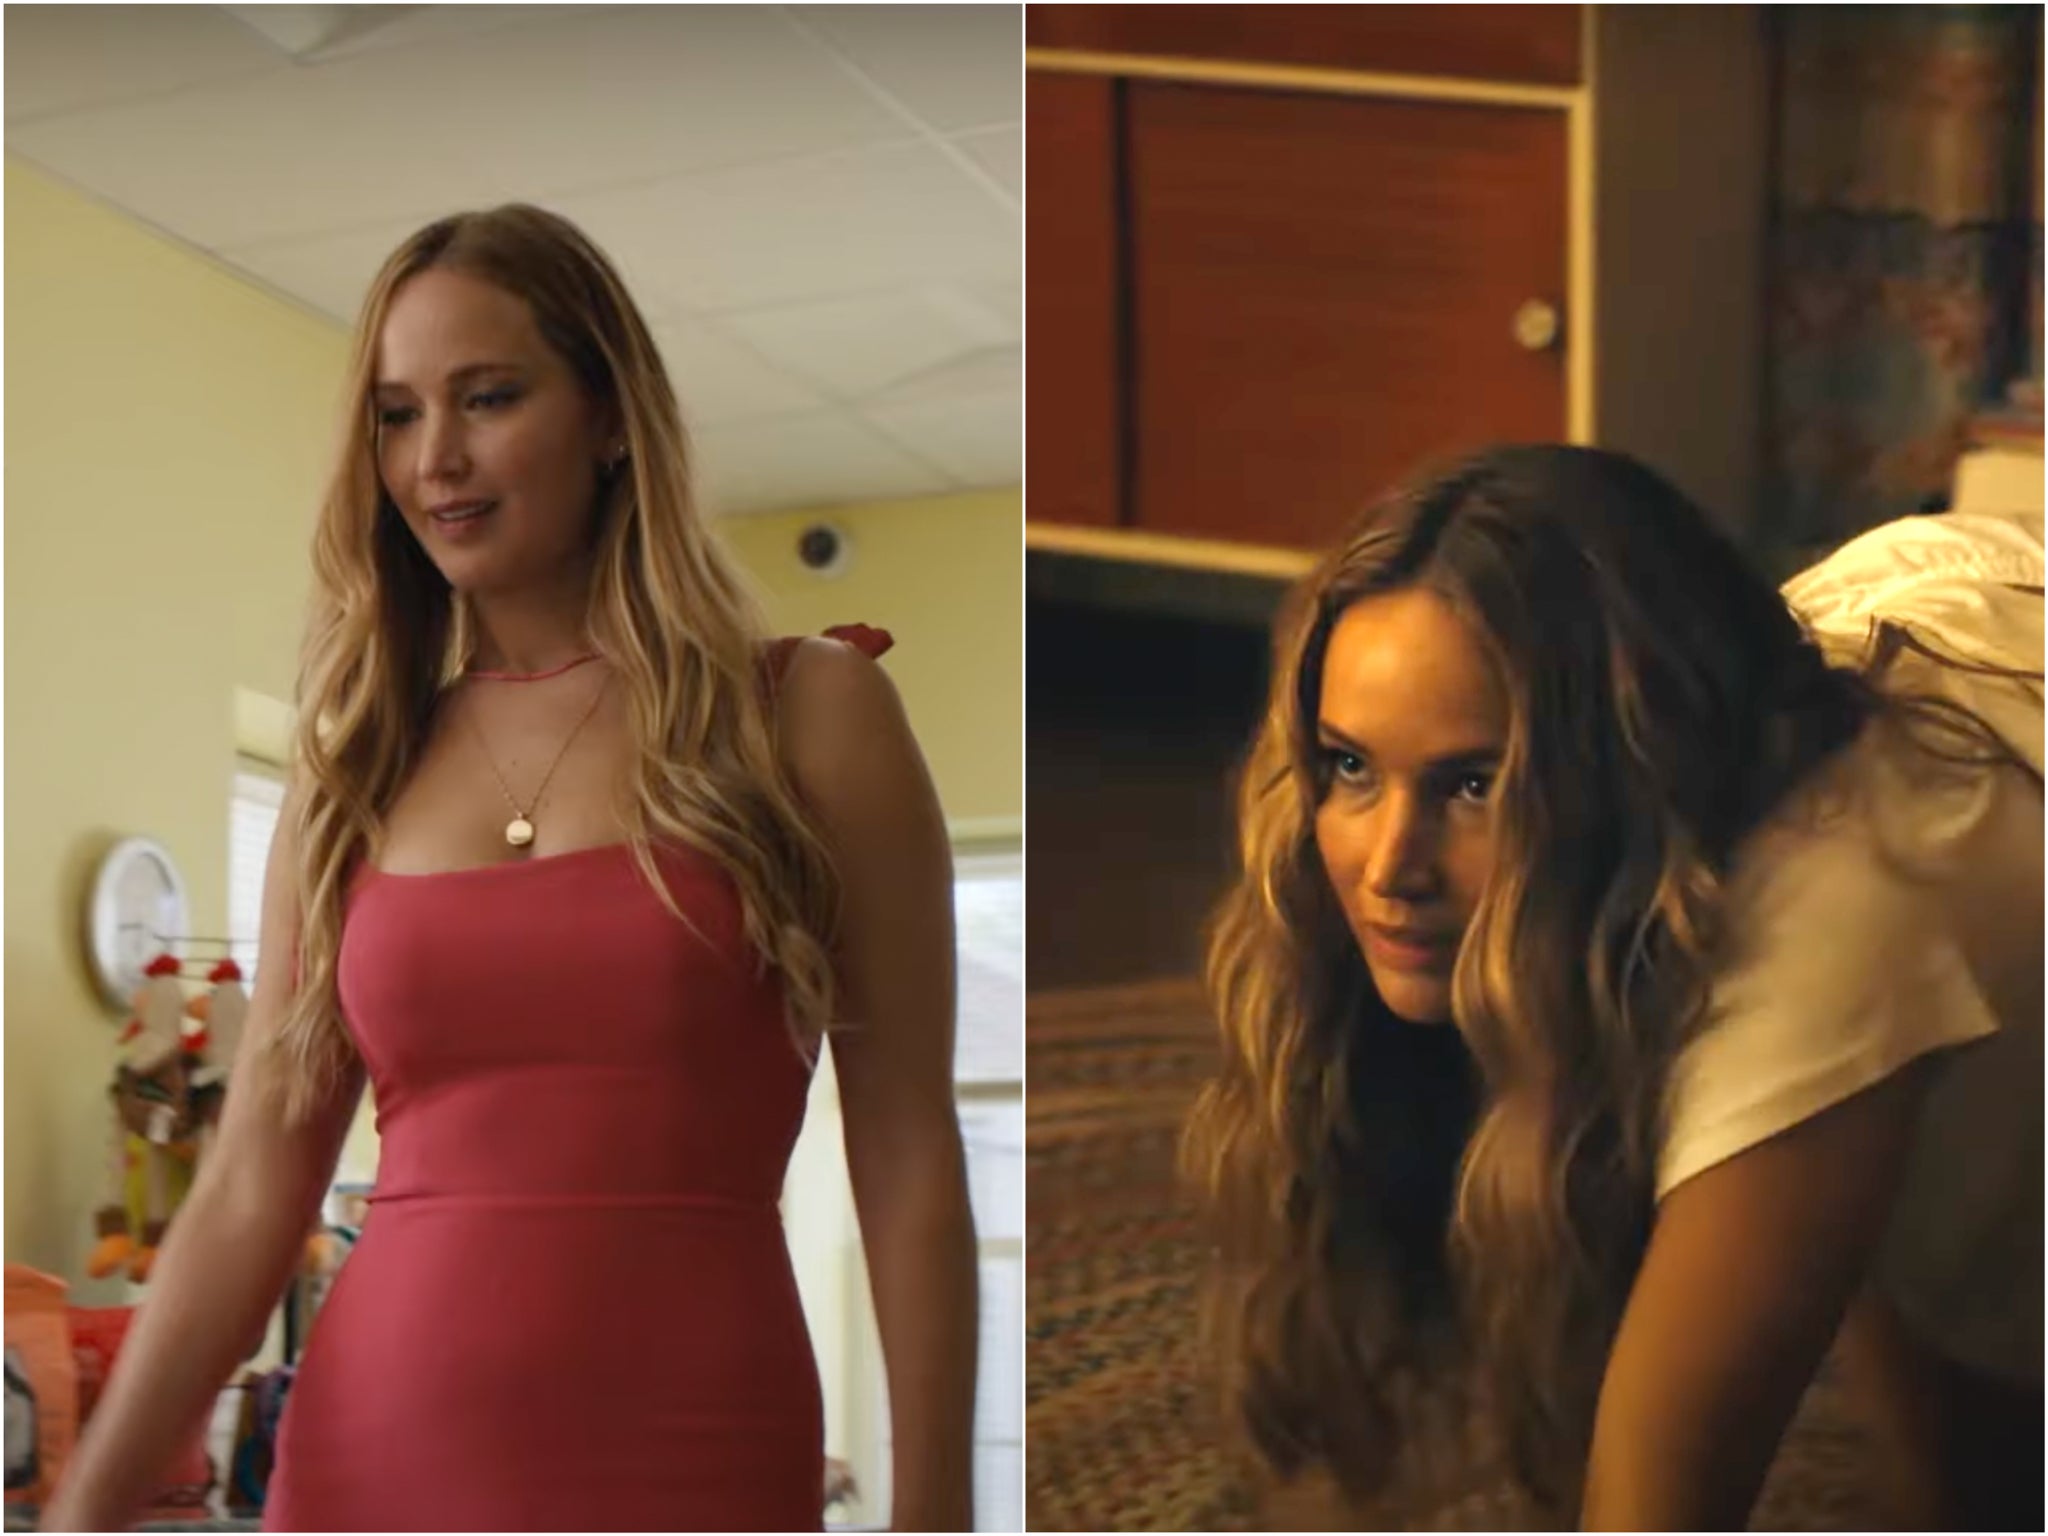 No Hard Feelings Jennifer Lawrence is hired to seduce a 19-year-old boy in new trailer The Independent photo